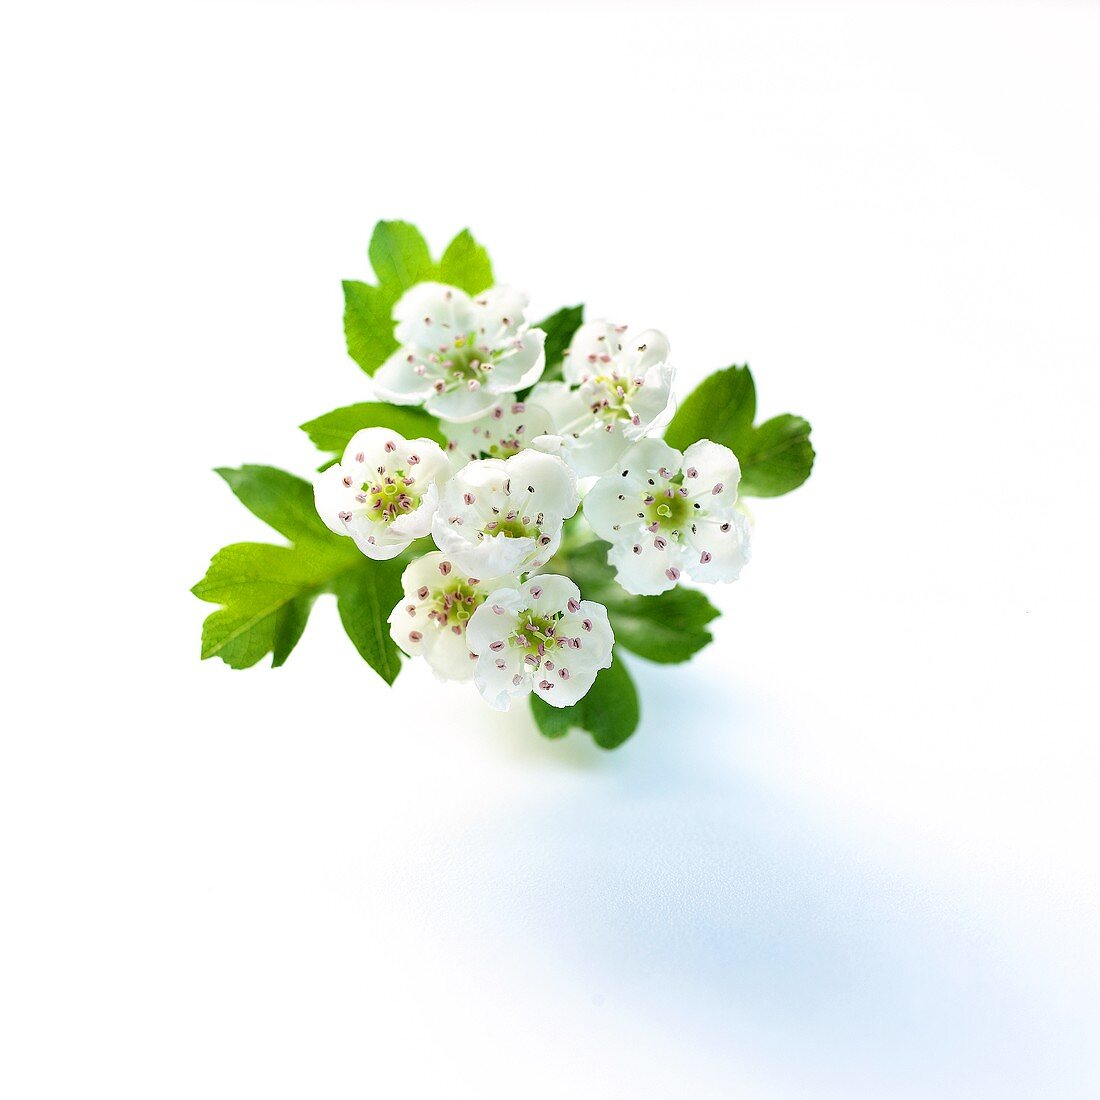 Hawthorn with blossom